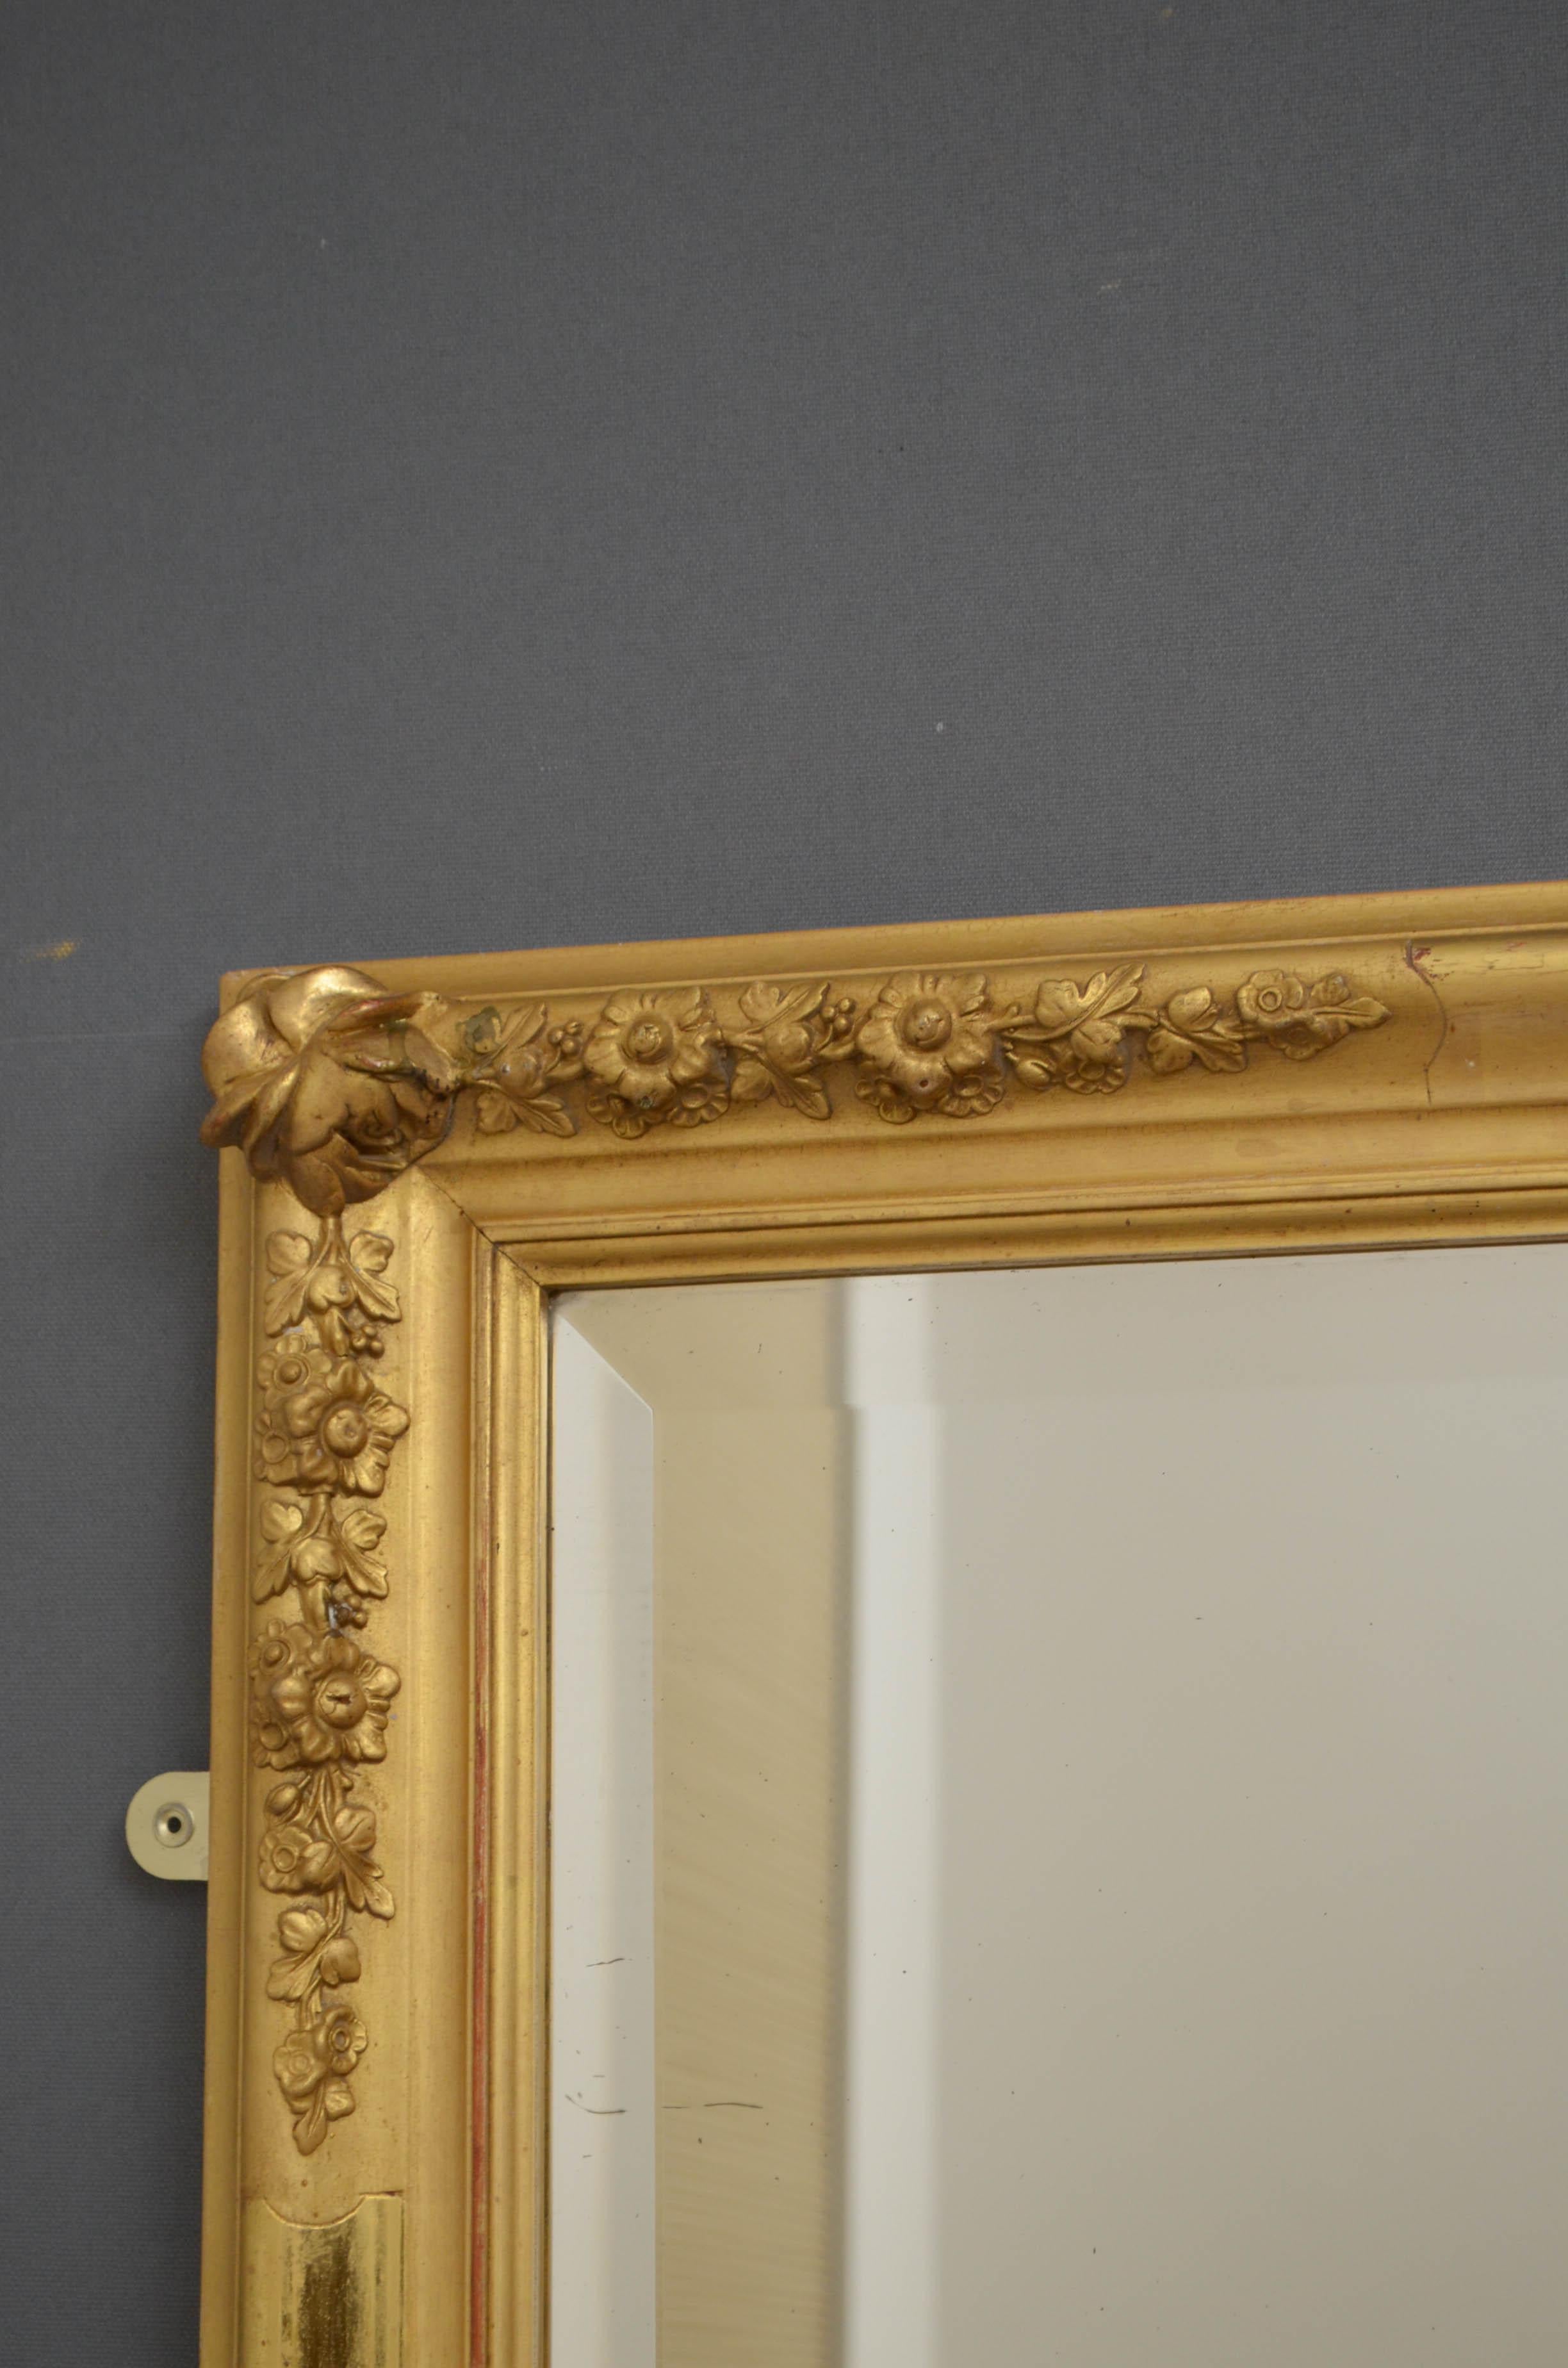 Sn4710 large 19th century giltwood wall mirror, having original bevelled edge glass with some foxing in finely decorated gilded frame. This antique mirror retains original glass, gilt and backboard, all in excellent home ready condition. Can be